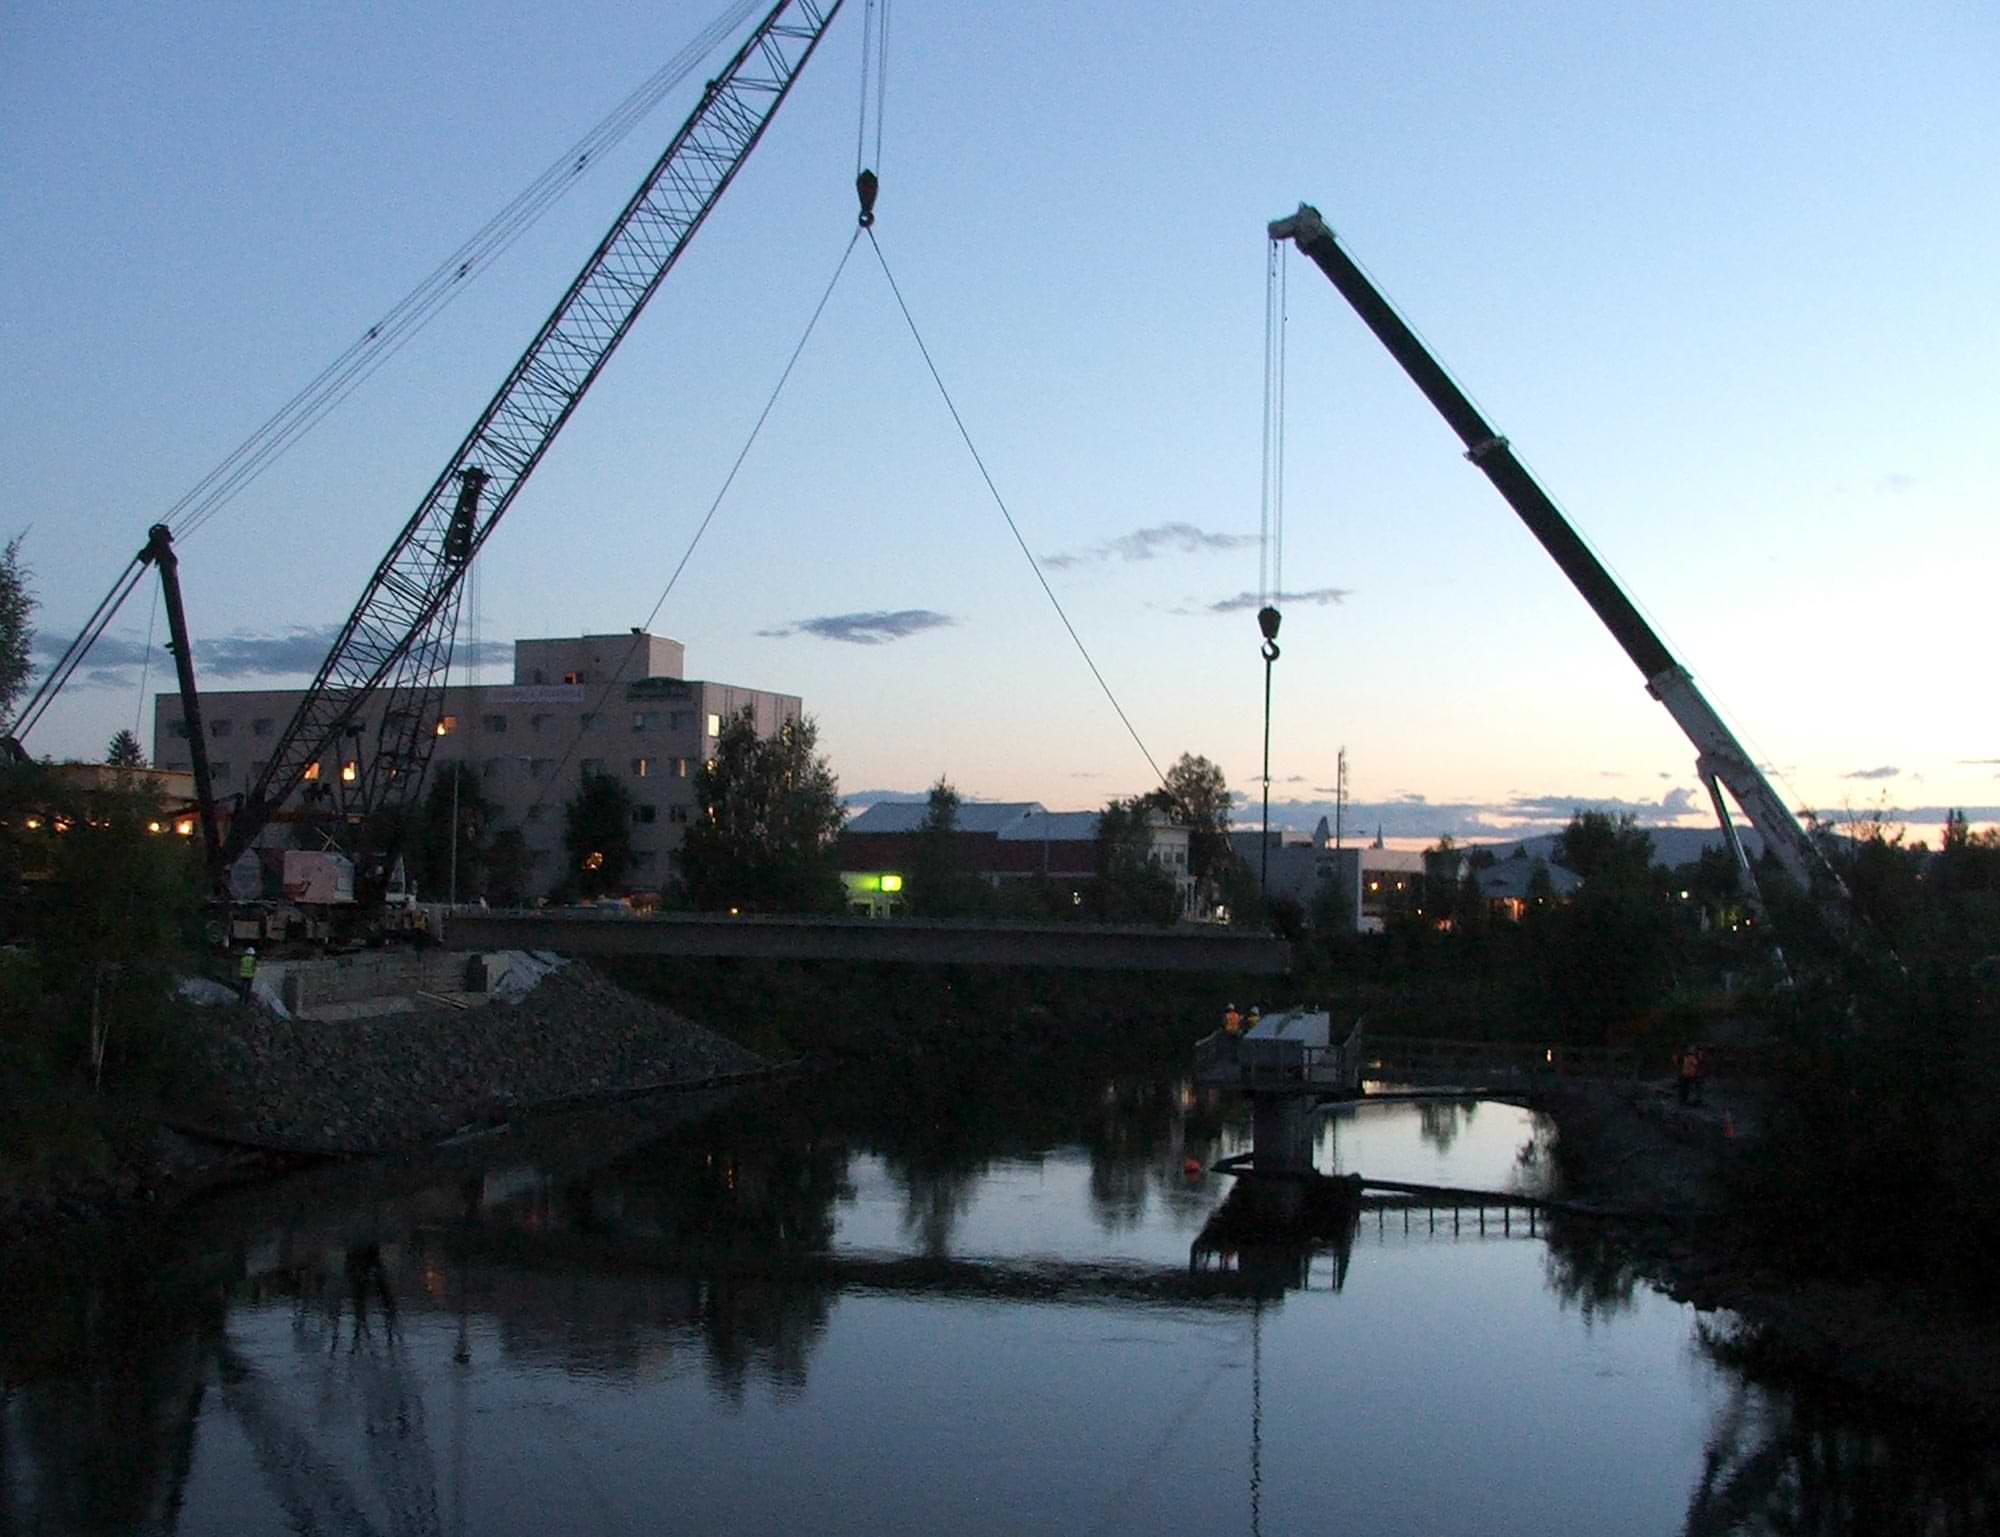 Precision Cranes and constructors work on the 2011 Cushman Street Bridge Project against a low sun